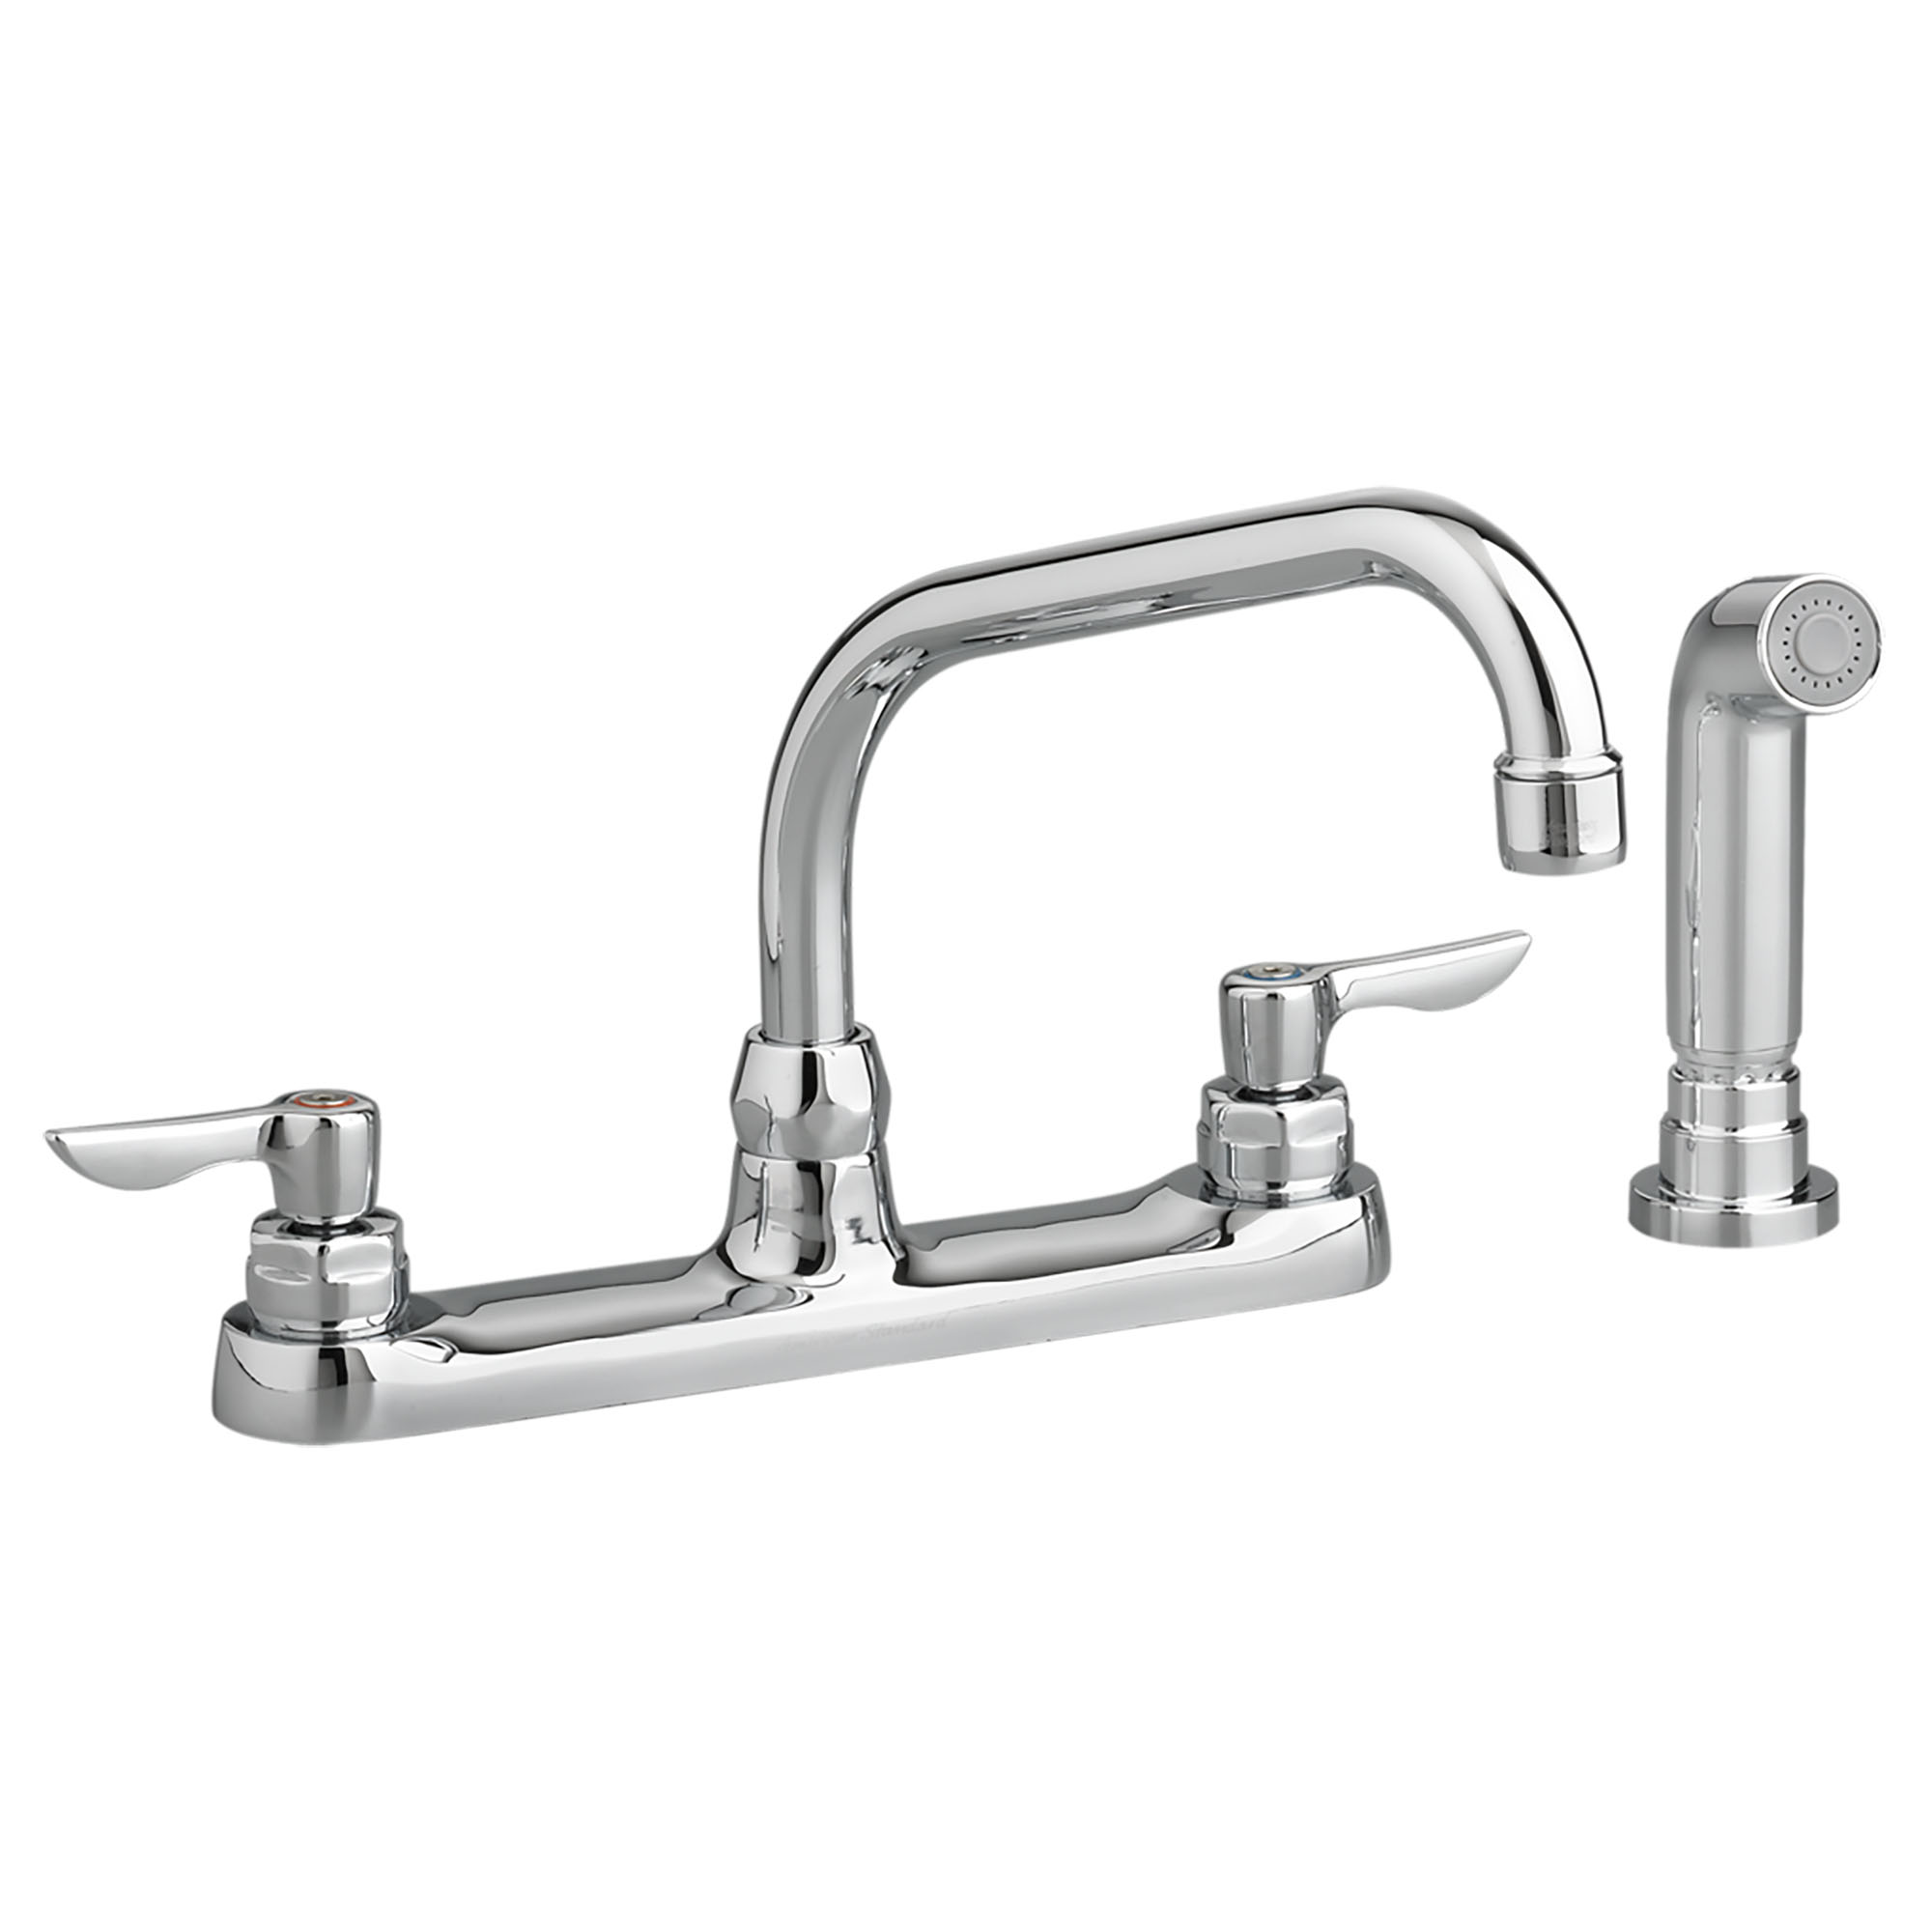 Monterrey™ Top Mount Kitchen Faucet With Tubular Spout and Lever Handles 1.5 gpm/5.7 Lpf Less Spray